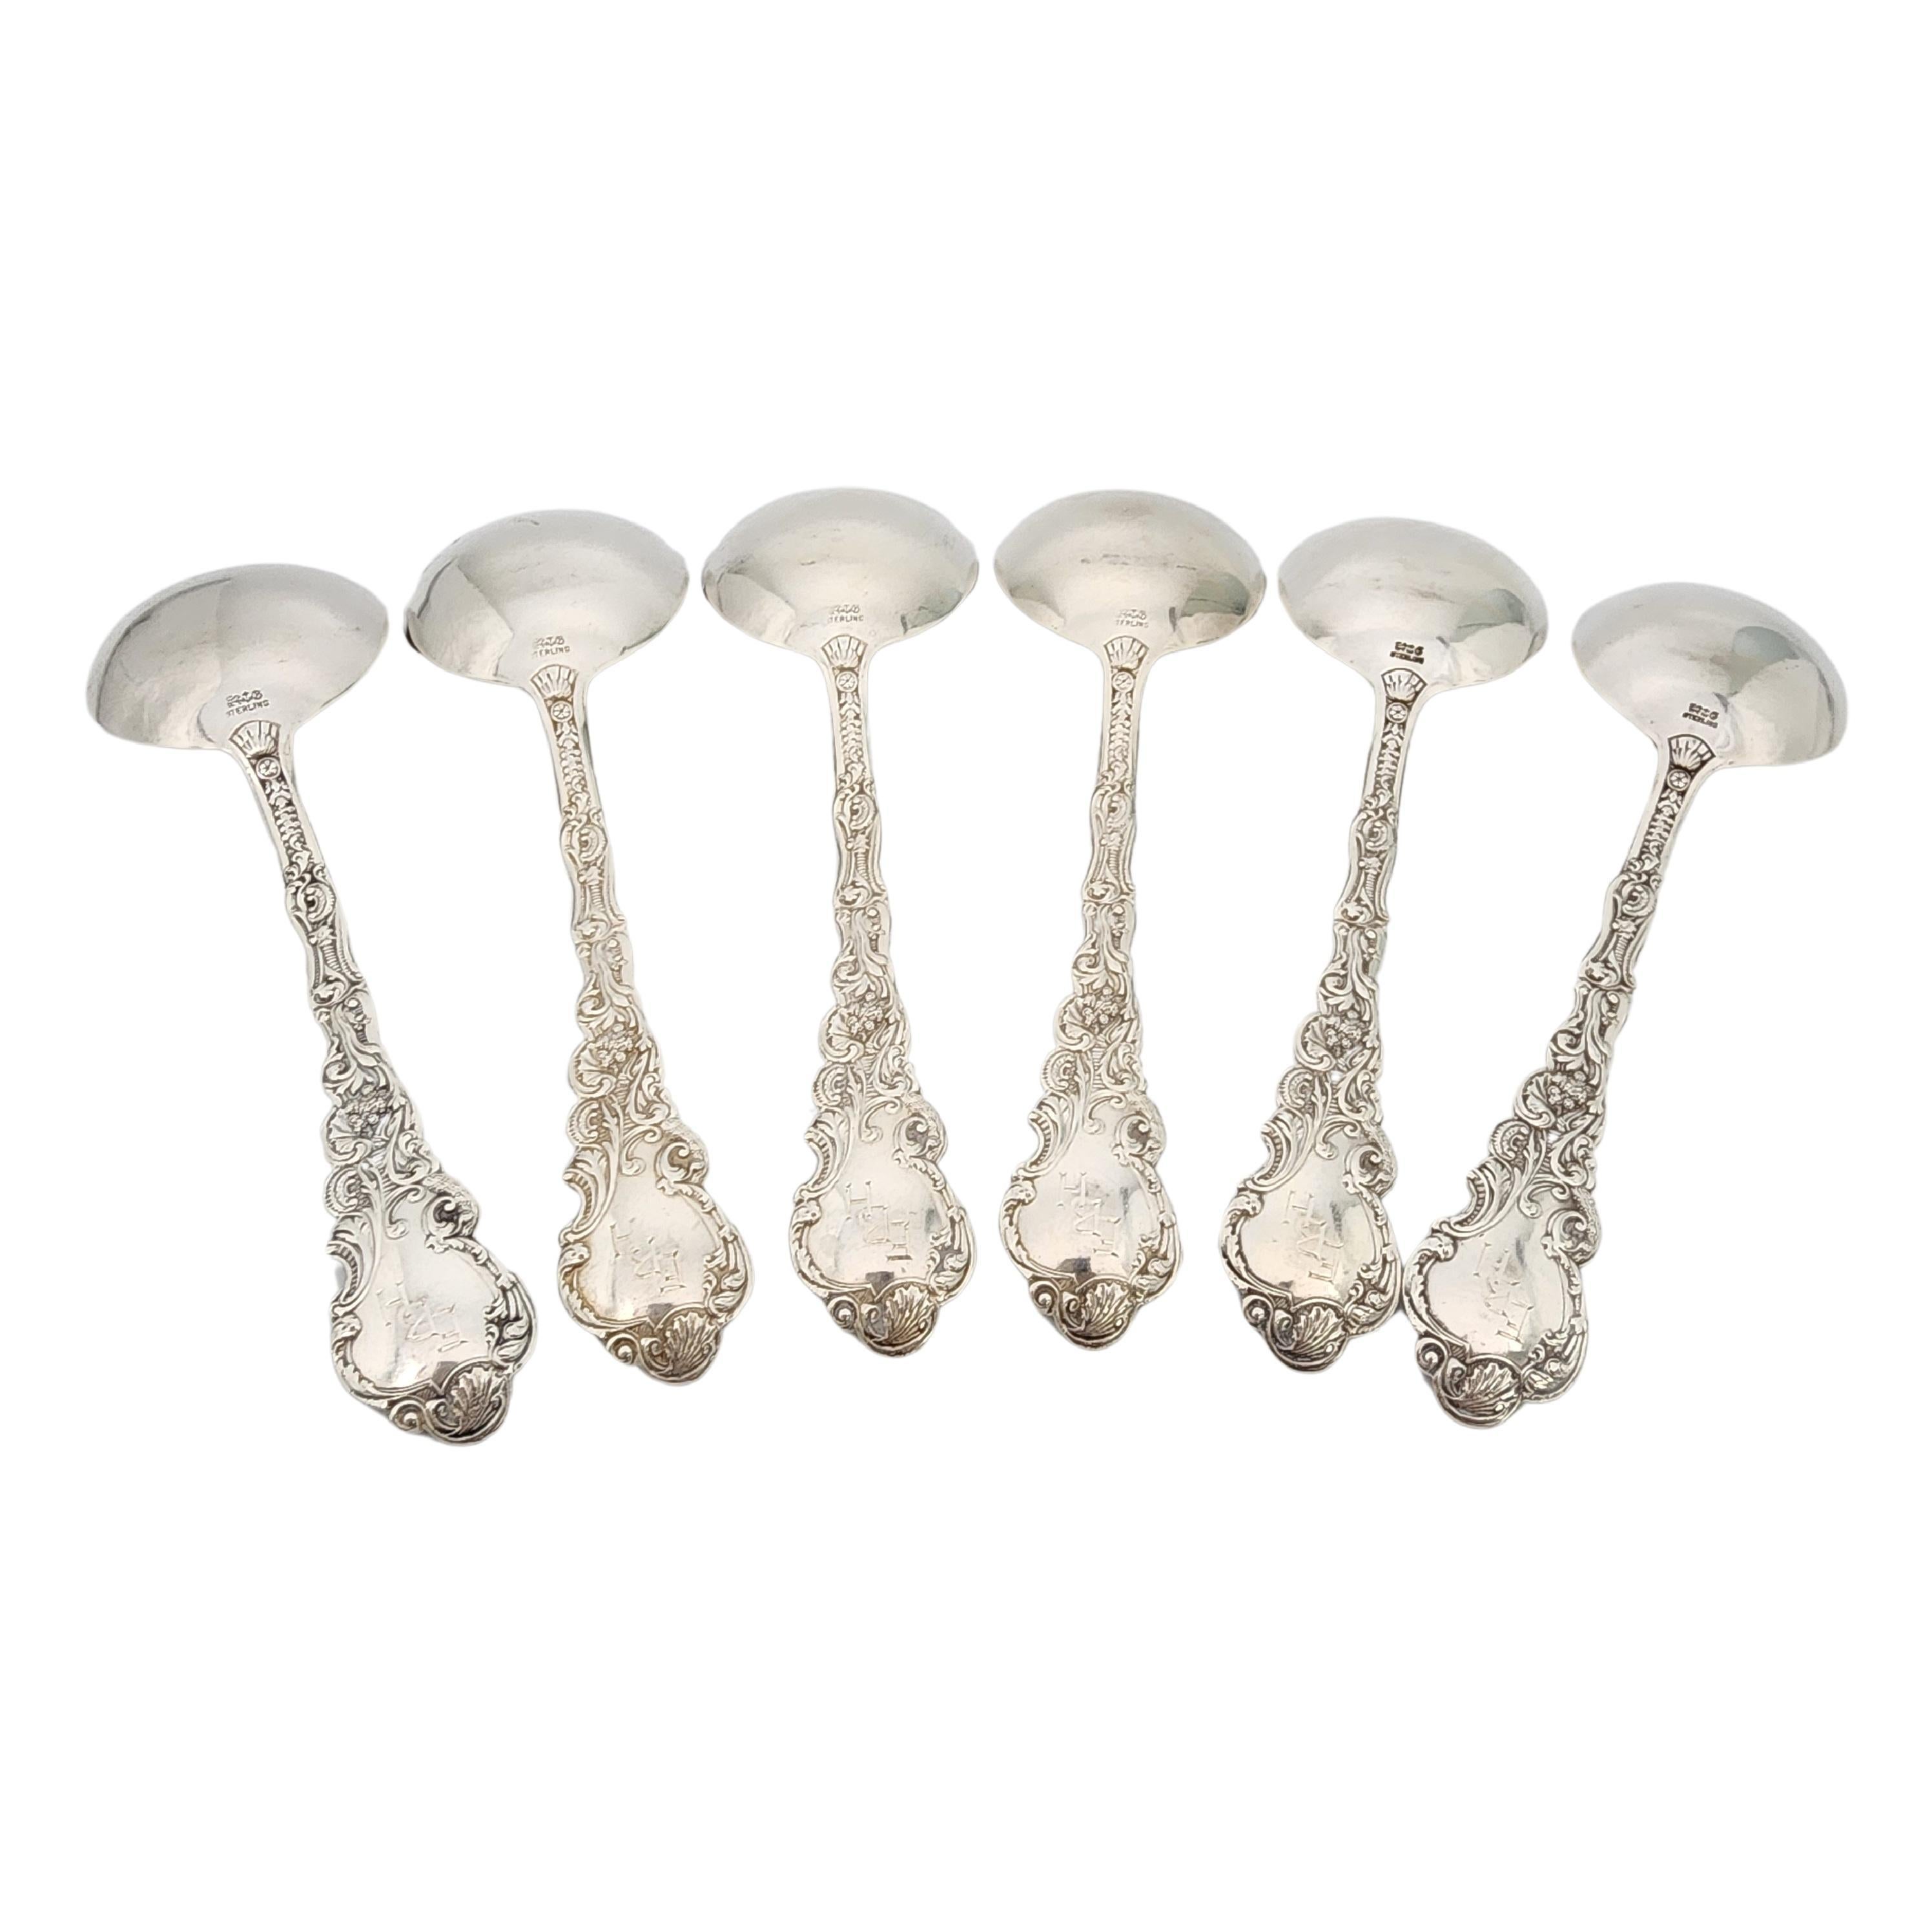 Set of 6 sterling silver round bowl gumbo spoon in the Versailles pattern by Gorham.

Monogram appears to be EBH (see photos).

Gorham's Versailles is a multi motif pattern designed by Antoine Heller in 1885. Named for the Palace of Versailles, the